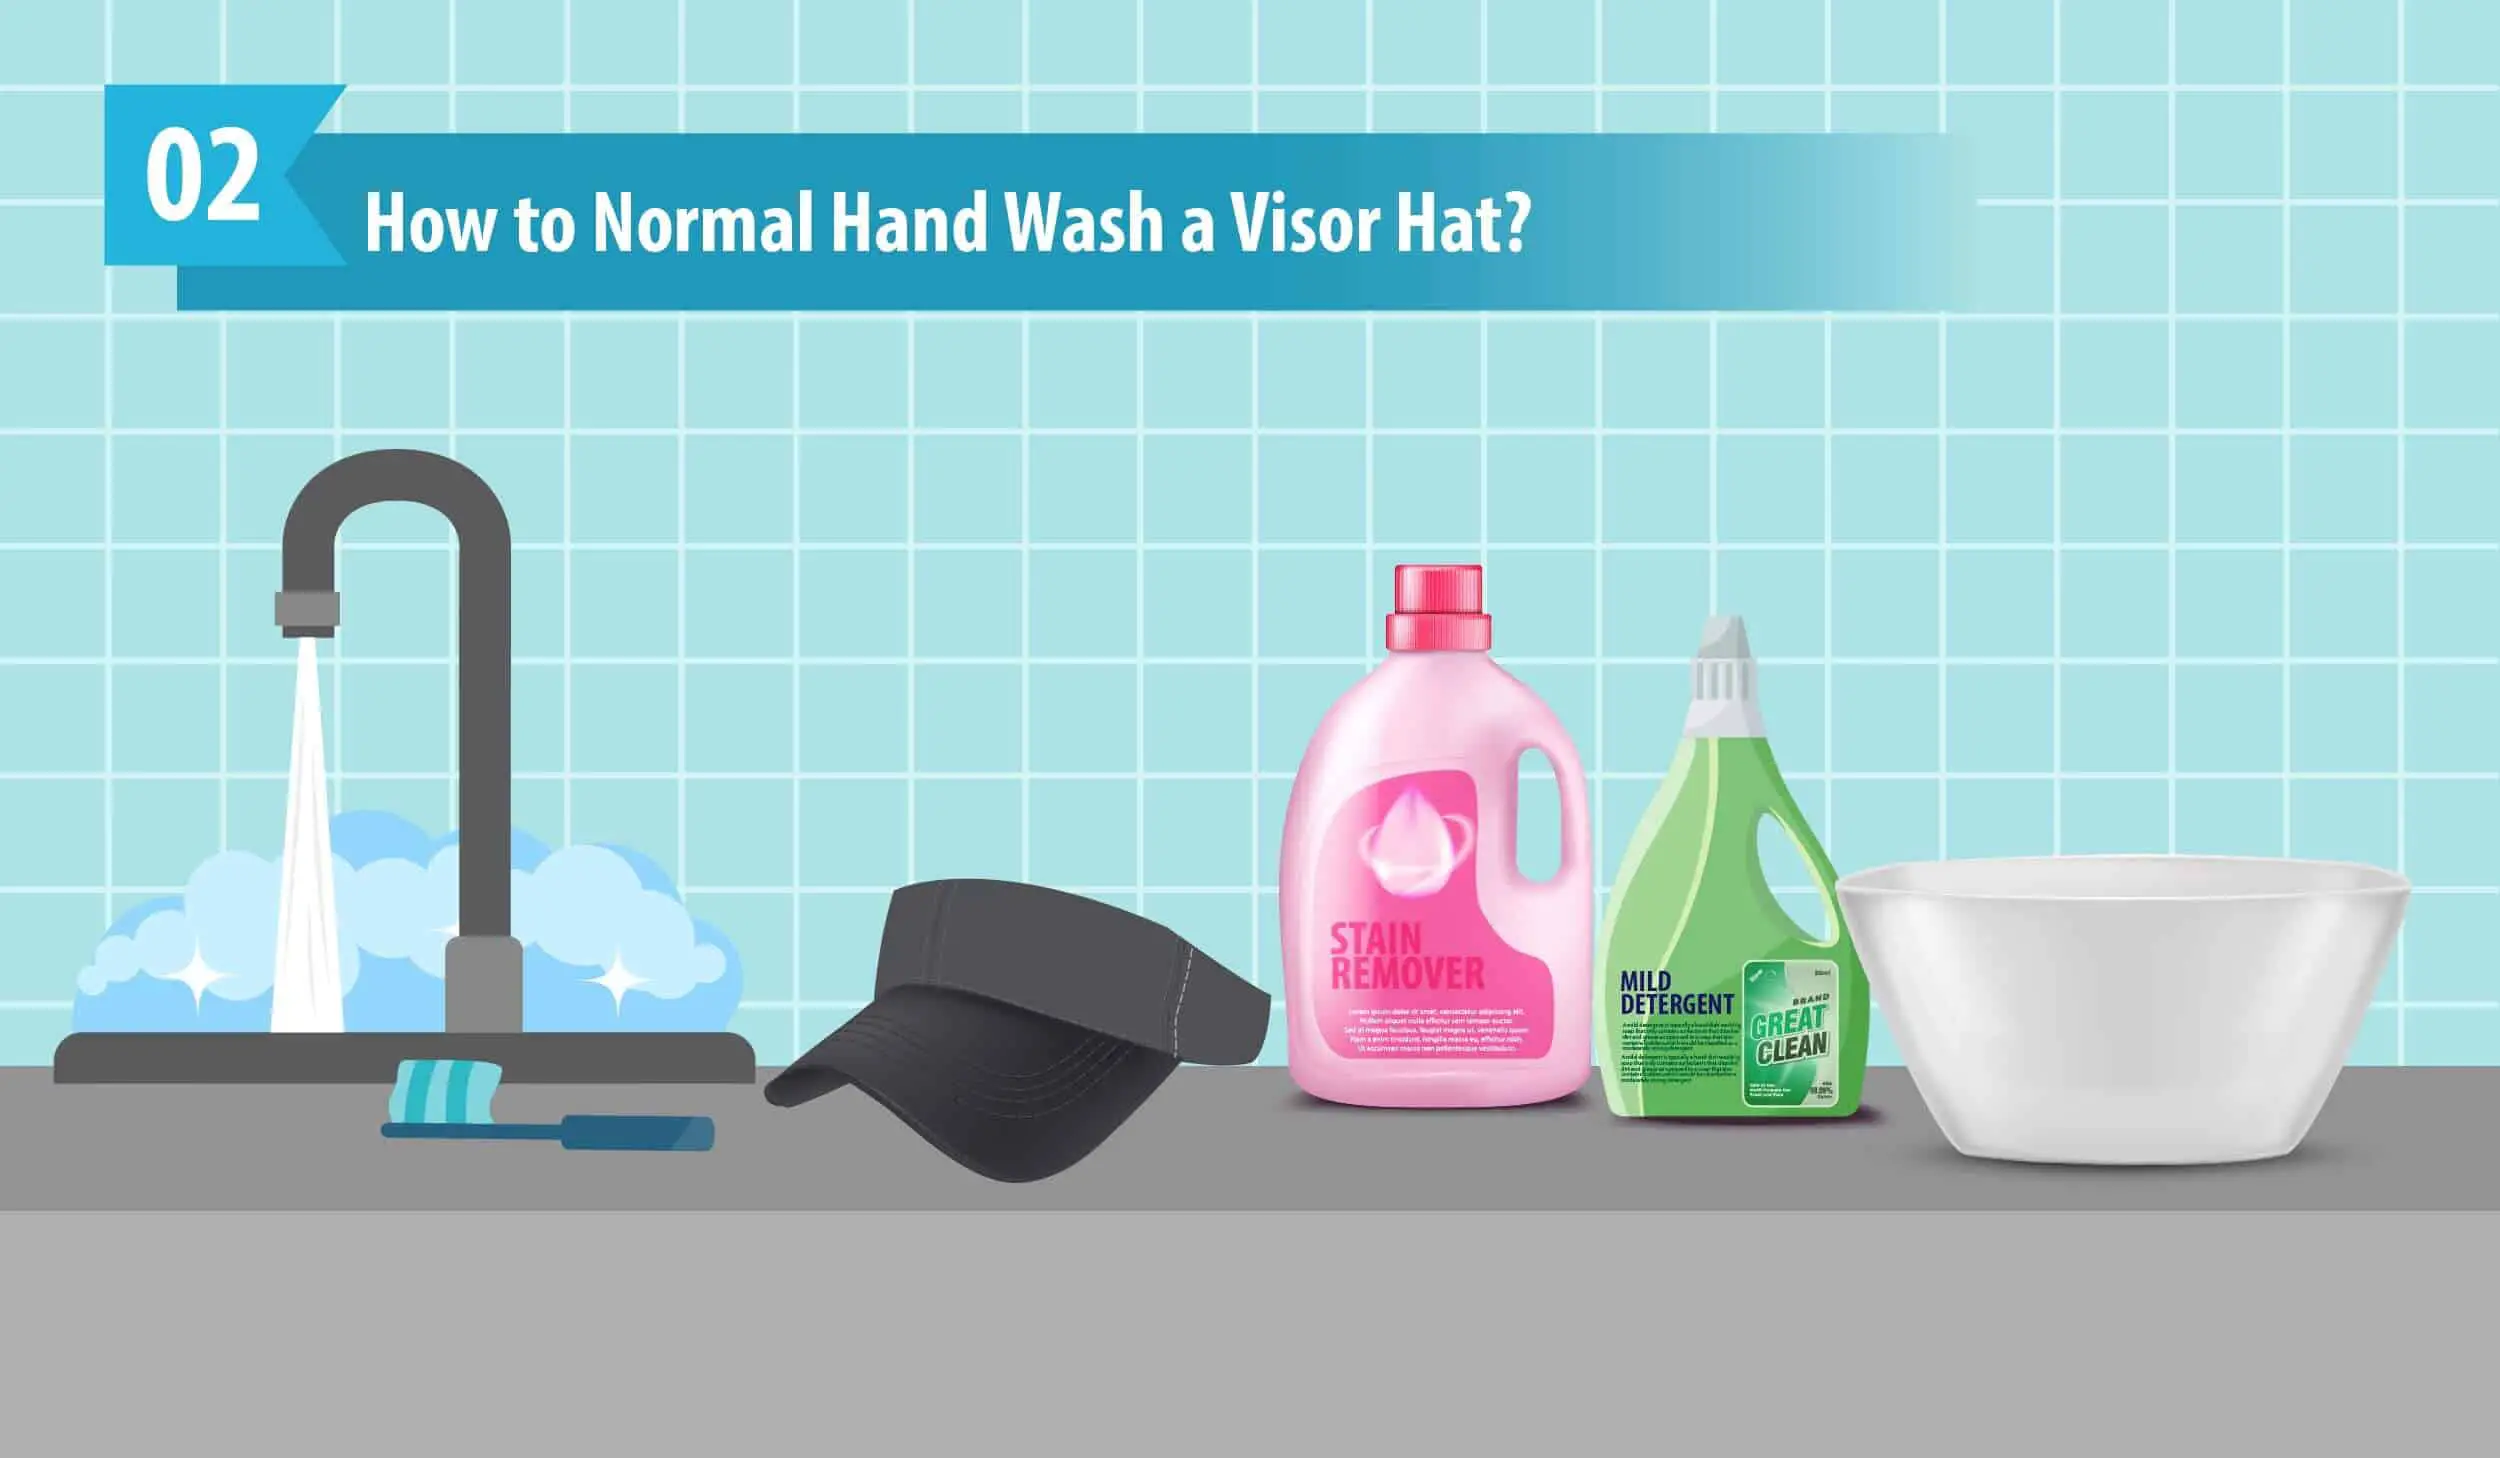 How to Normal Hand Wash a Visor Hat